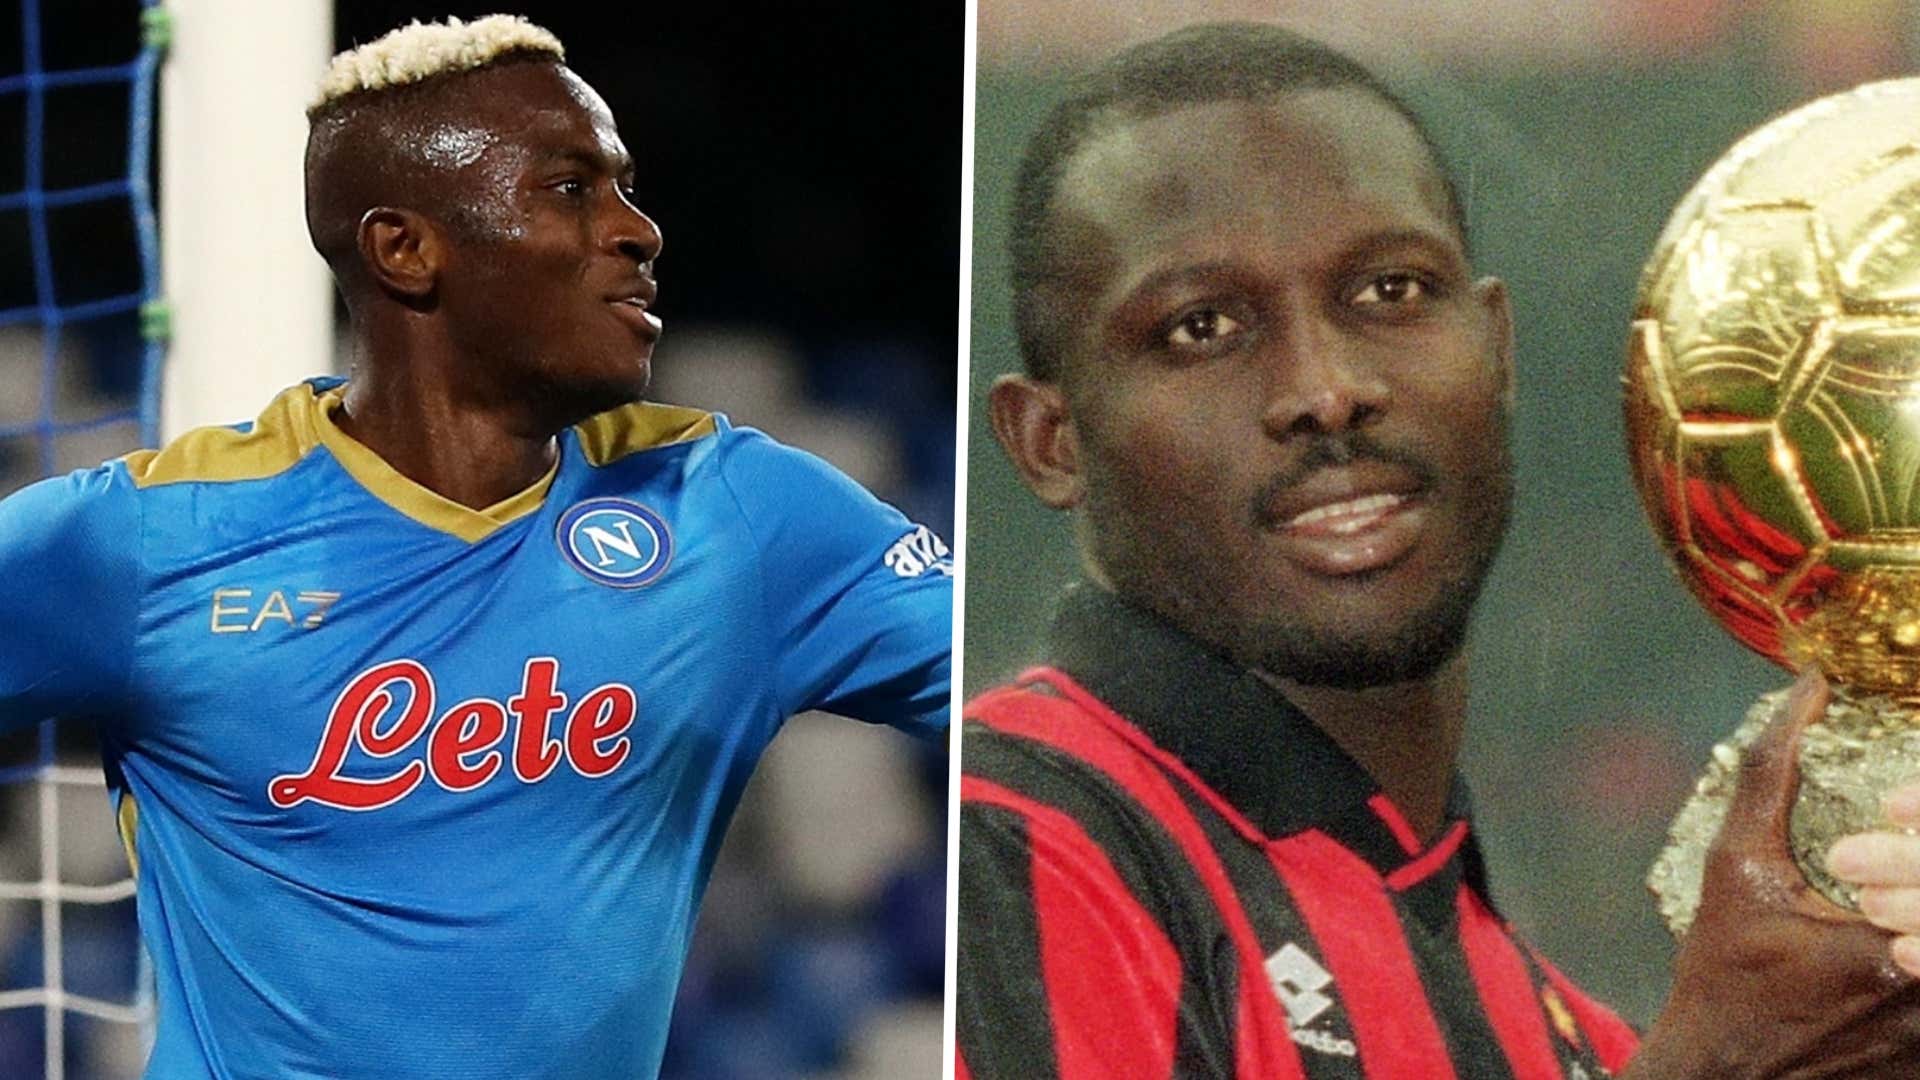 Napoli coach Spalletti compares Osimhen's quality to AC Milan legend Weah